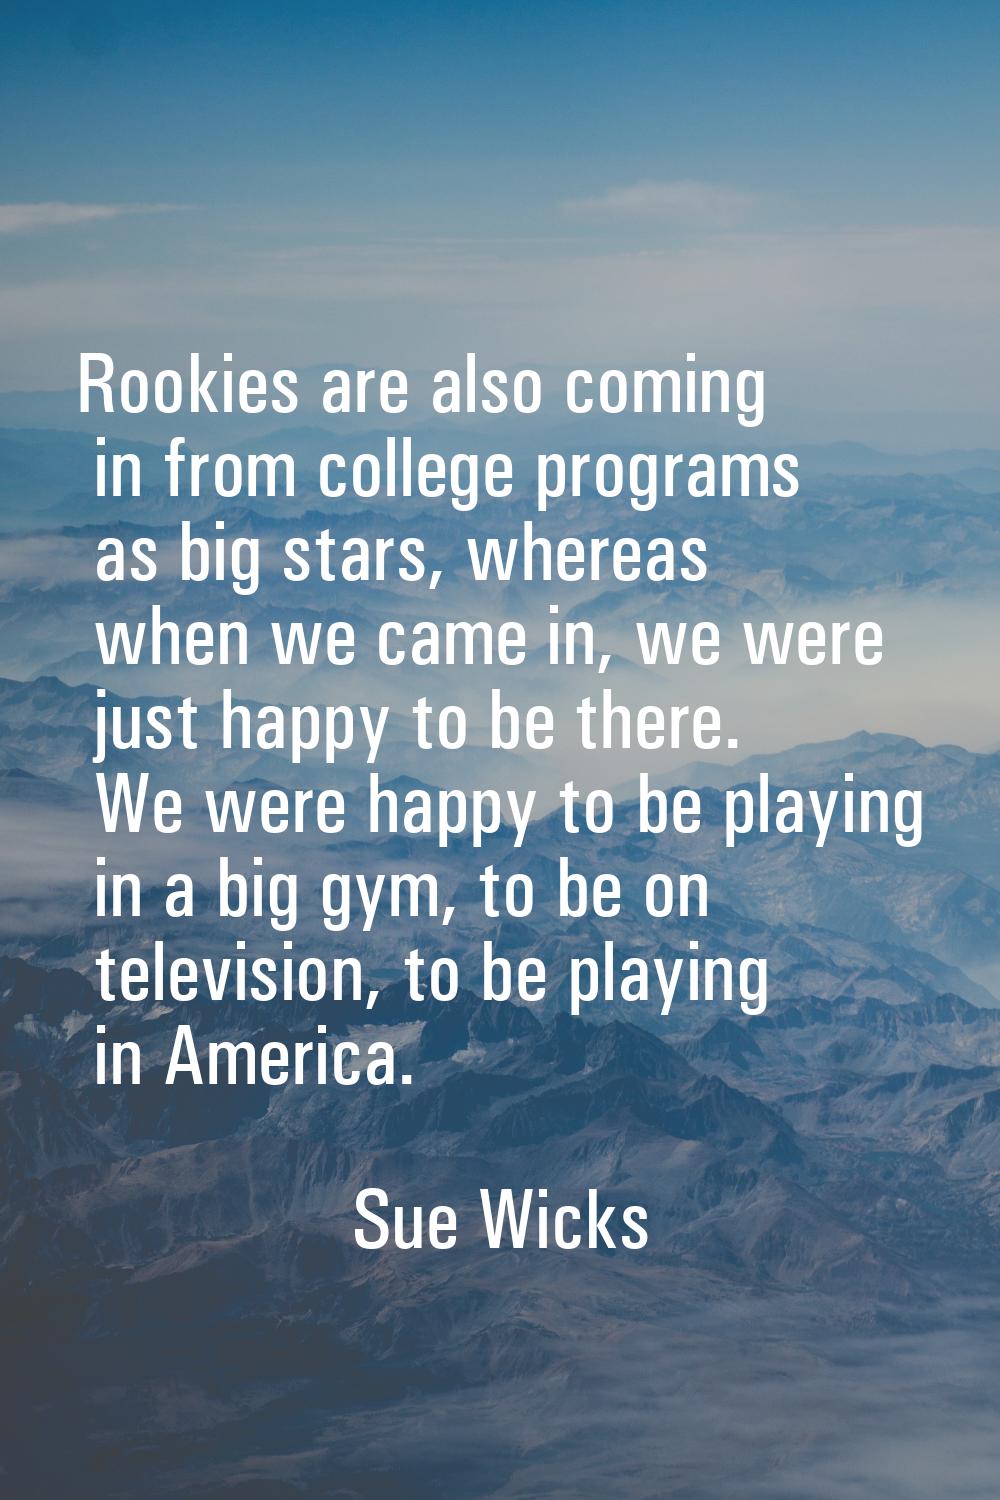 Rookies are also coming in from college programs as big stars, whereas when we came in, we were jus